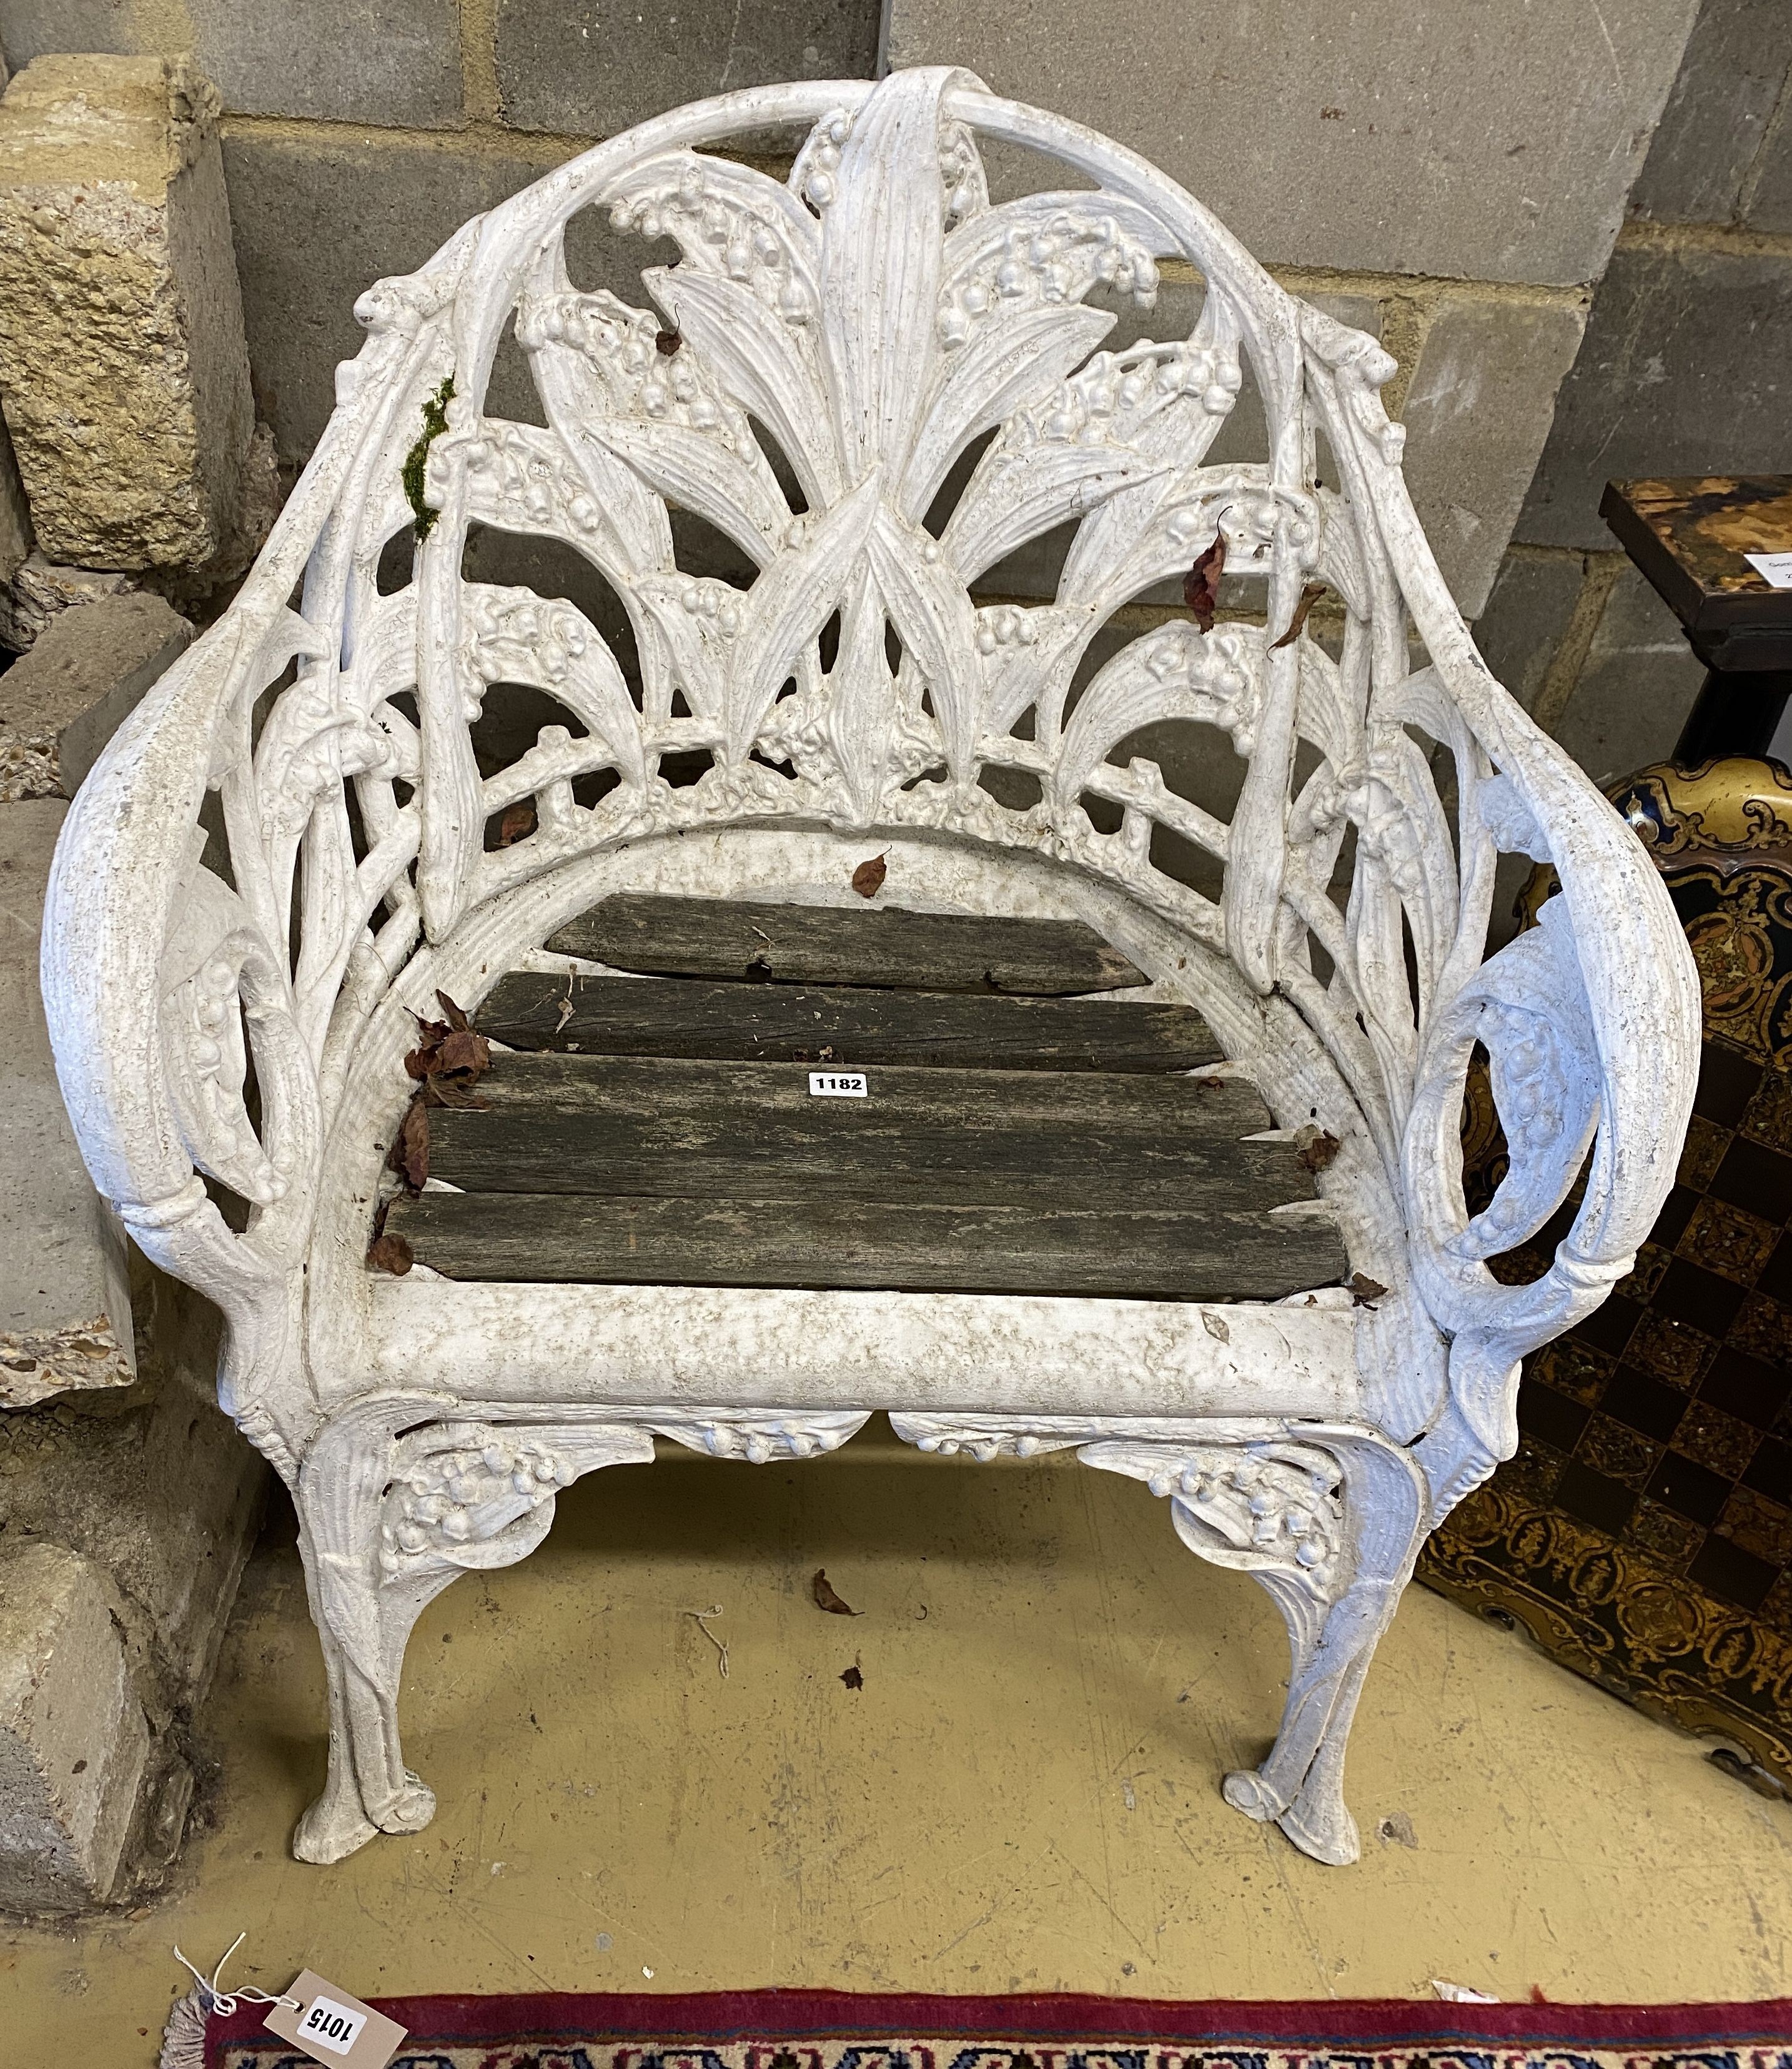 A Coalbrookdale style cast aluminium garden chair with slatted wood seat, width 65cm, depth 52cm, height 80cm